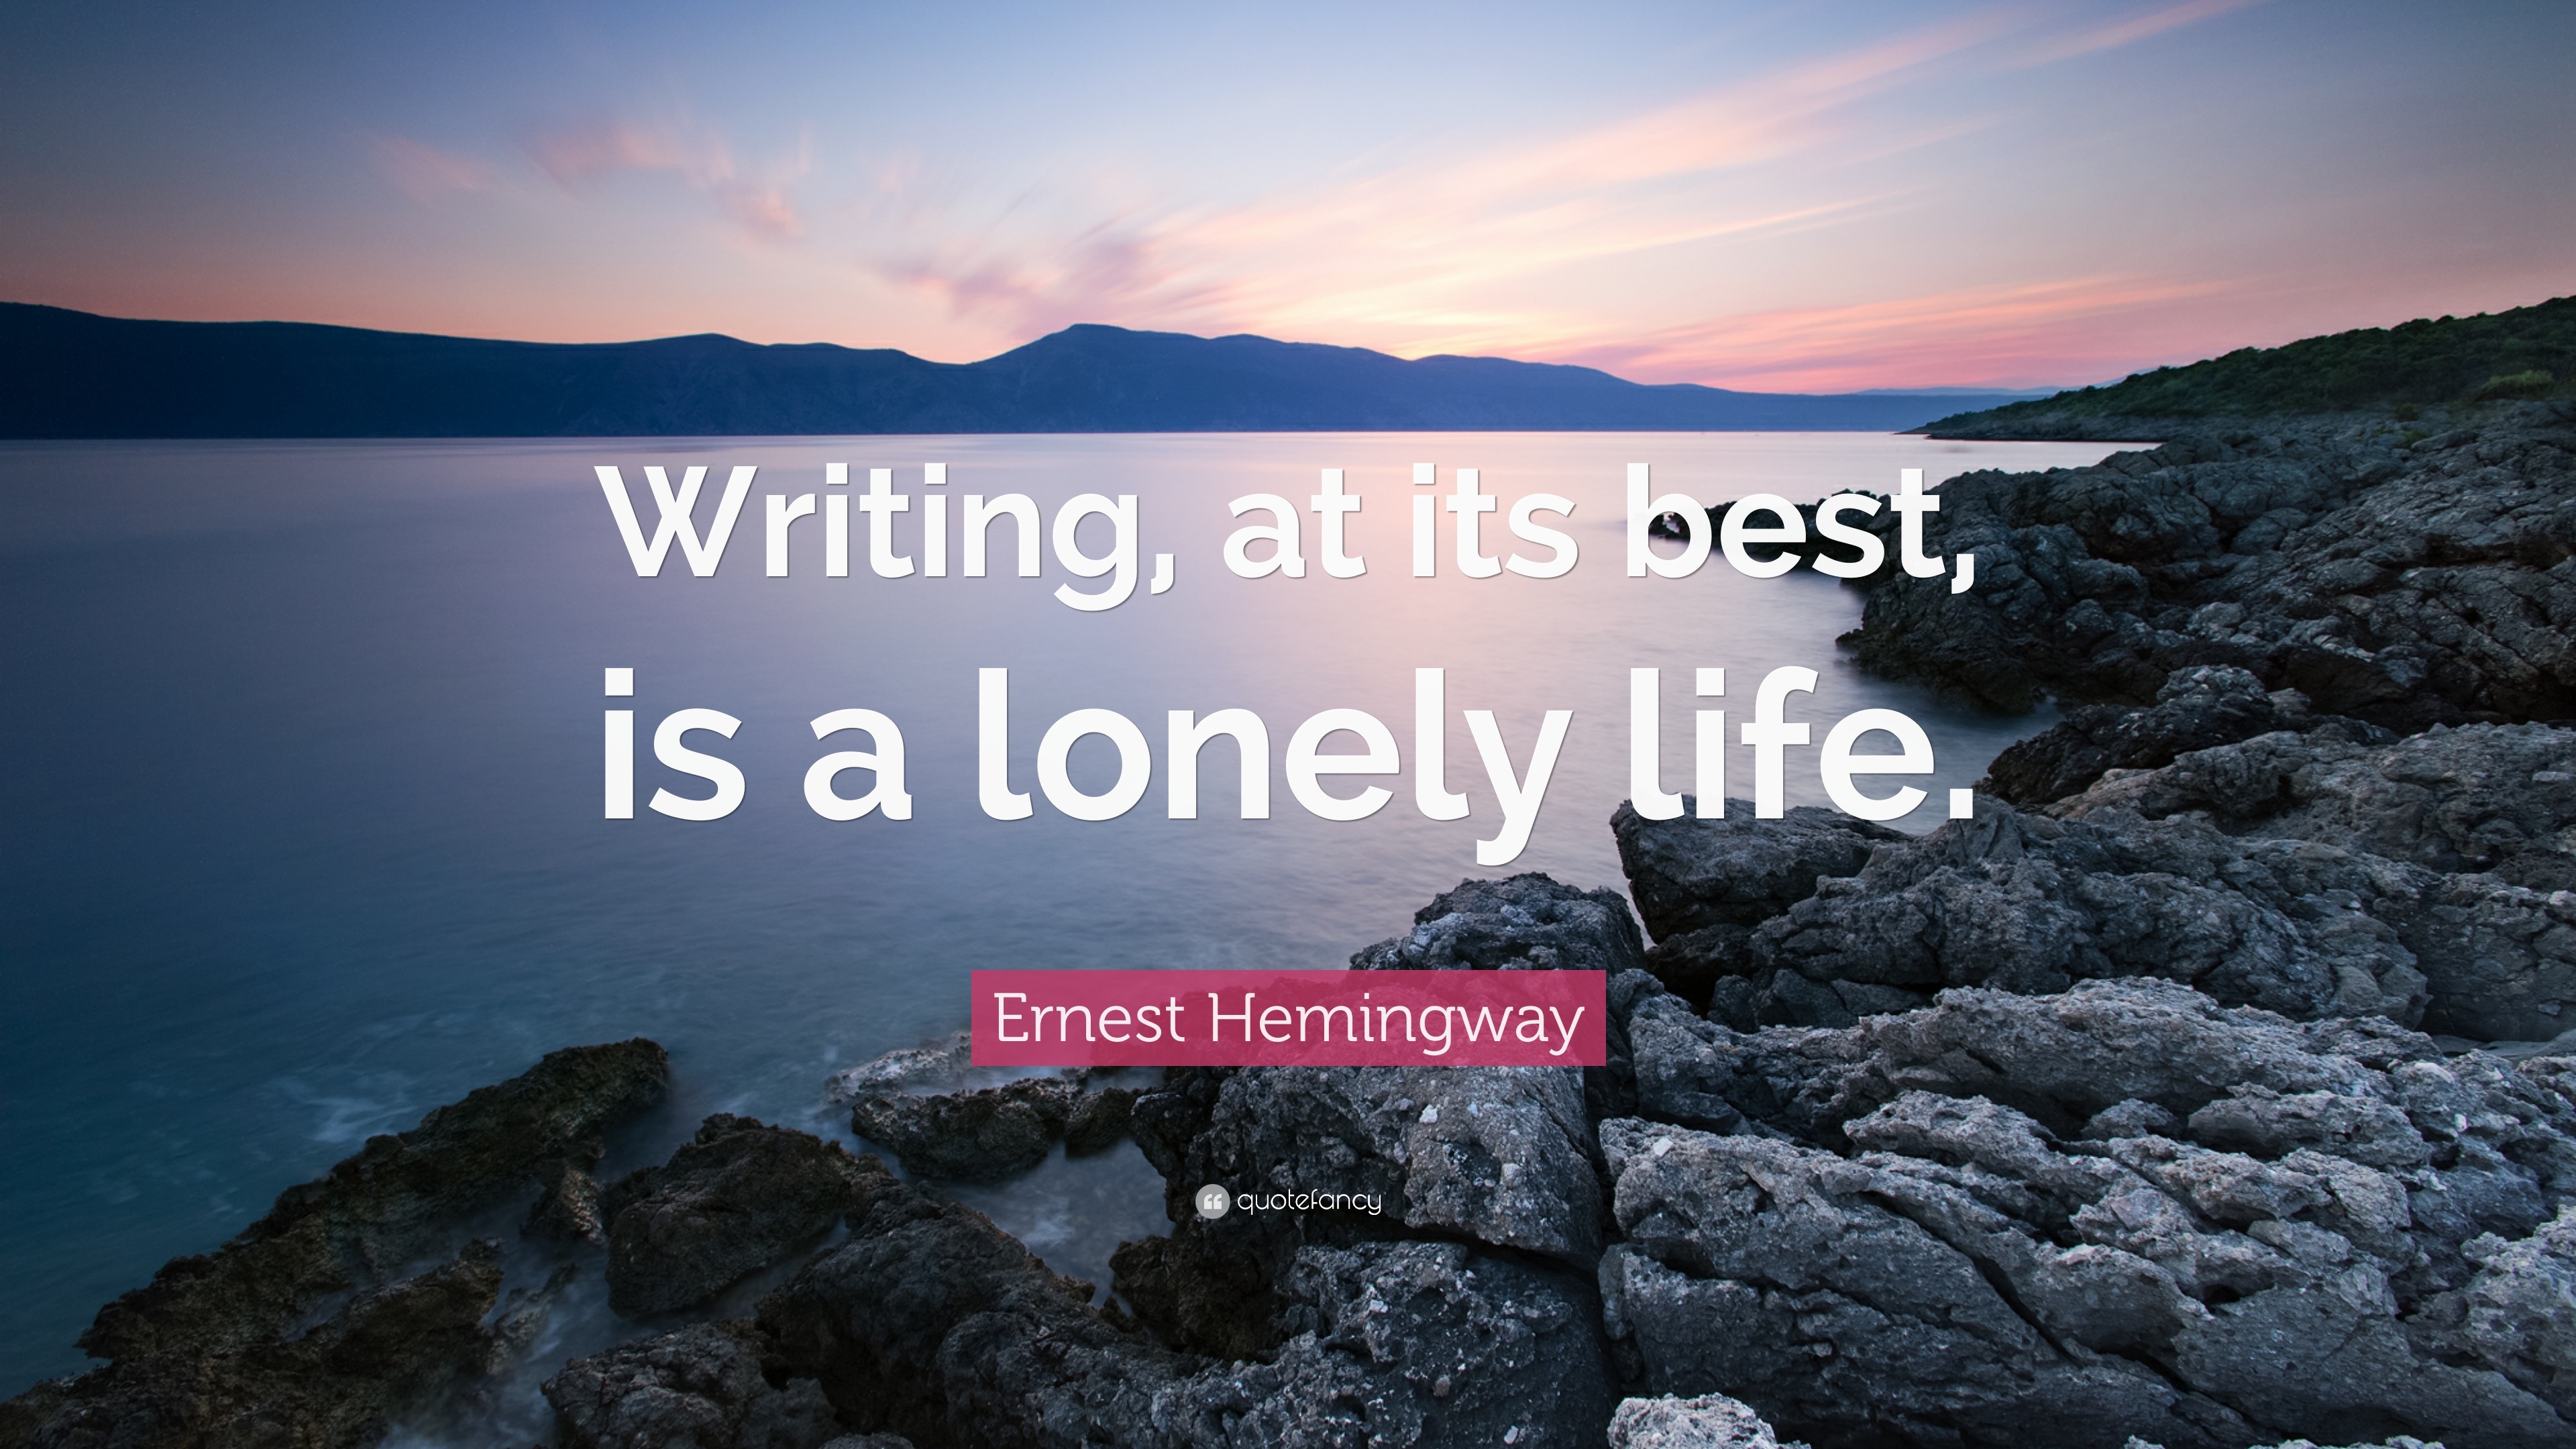 Ernest Hemingway Quote “Writing at its best is a lonely life